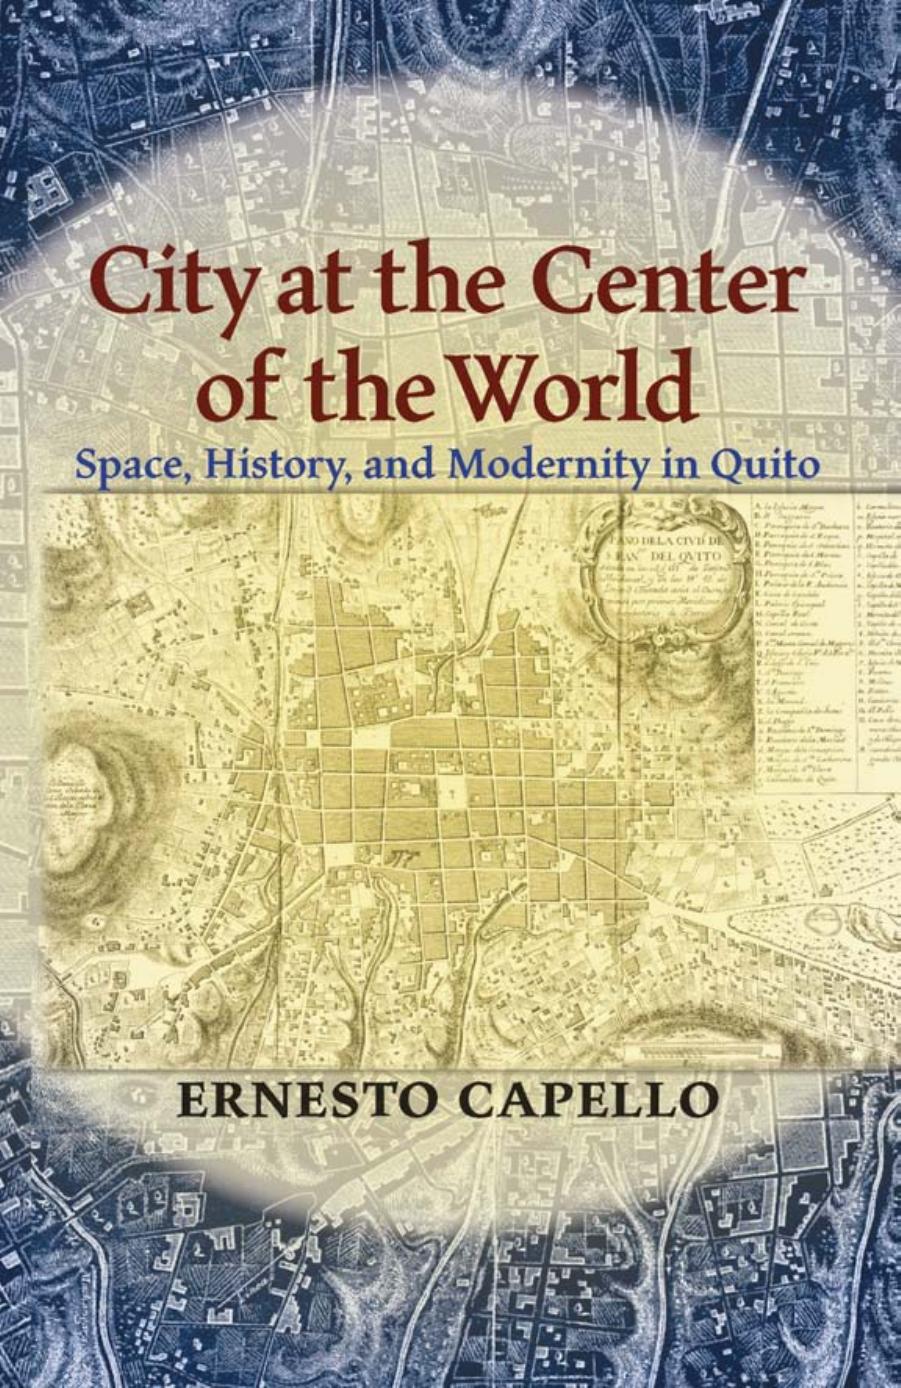 City at the Center of the World : Space, History, and Modernity in Quito by Ernesto Capello